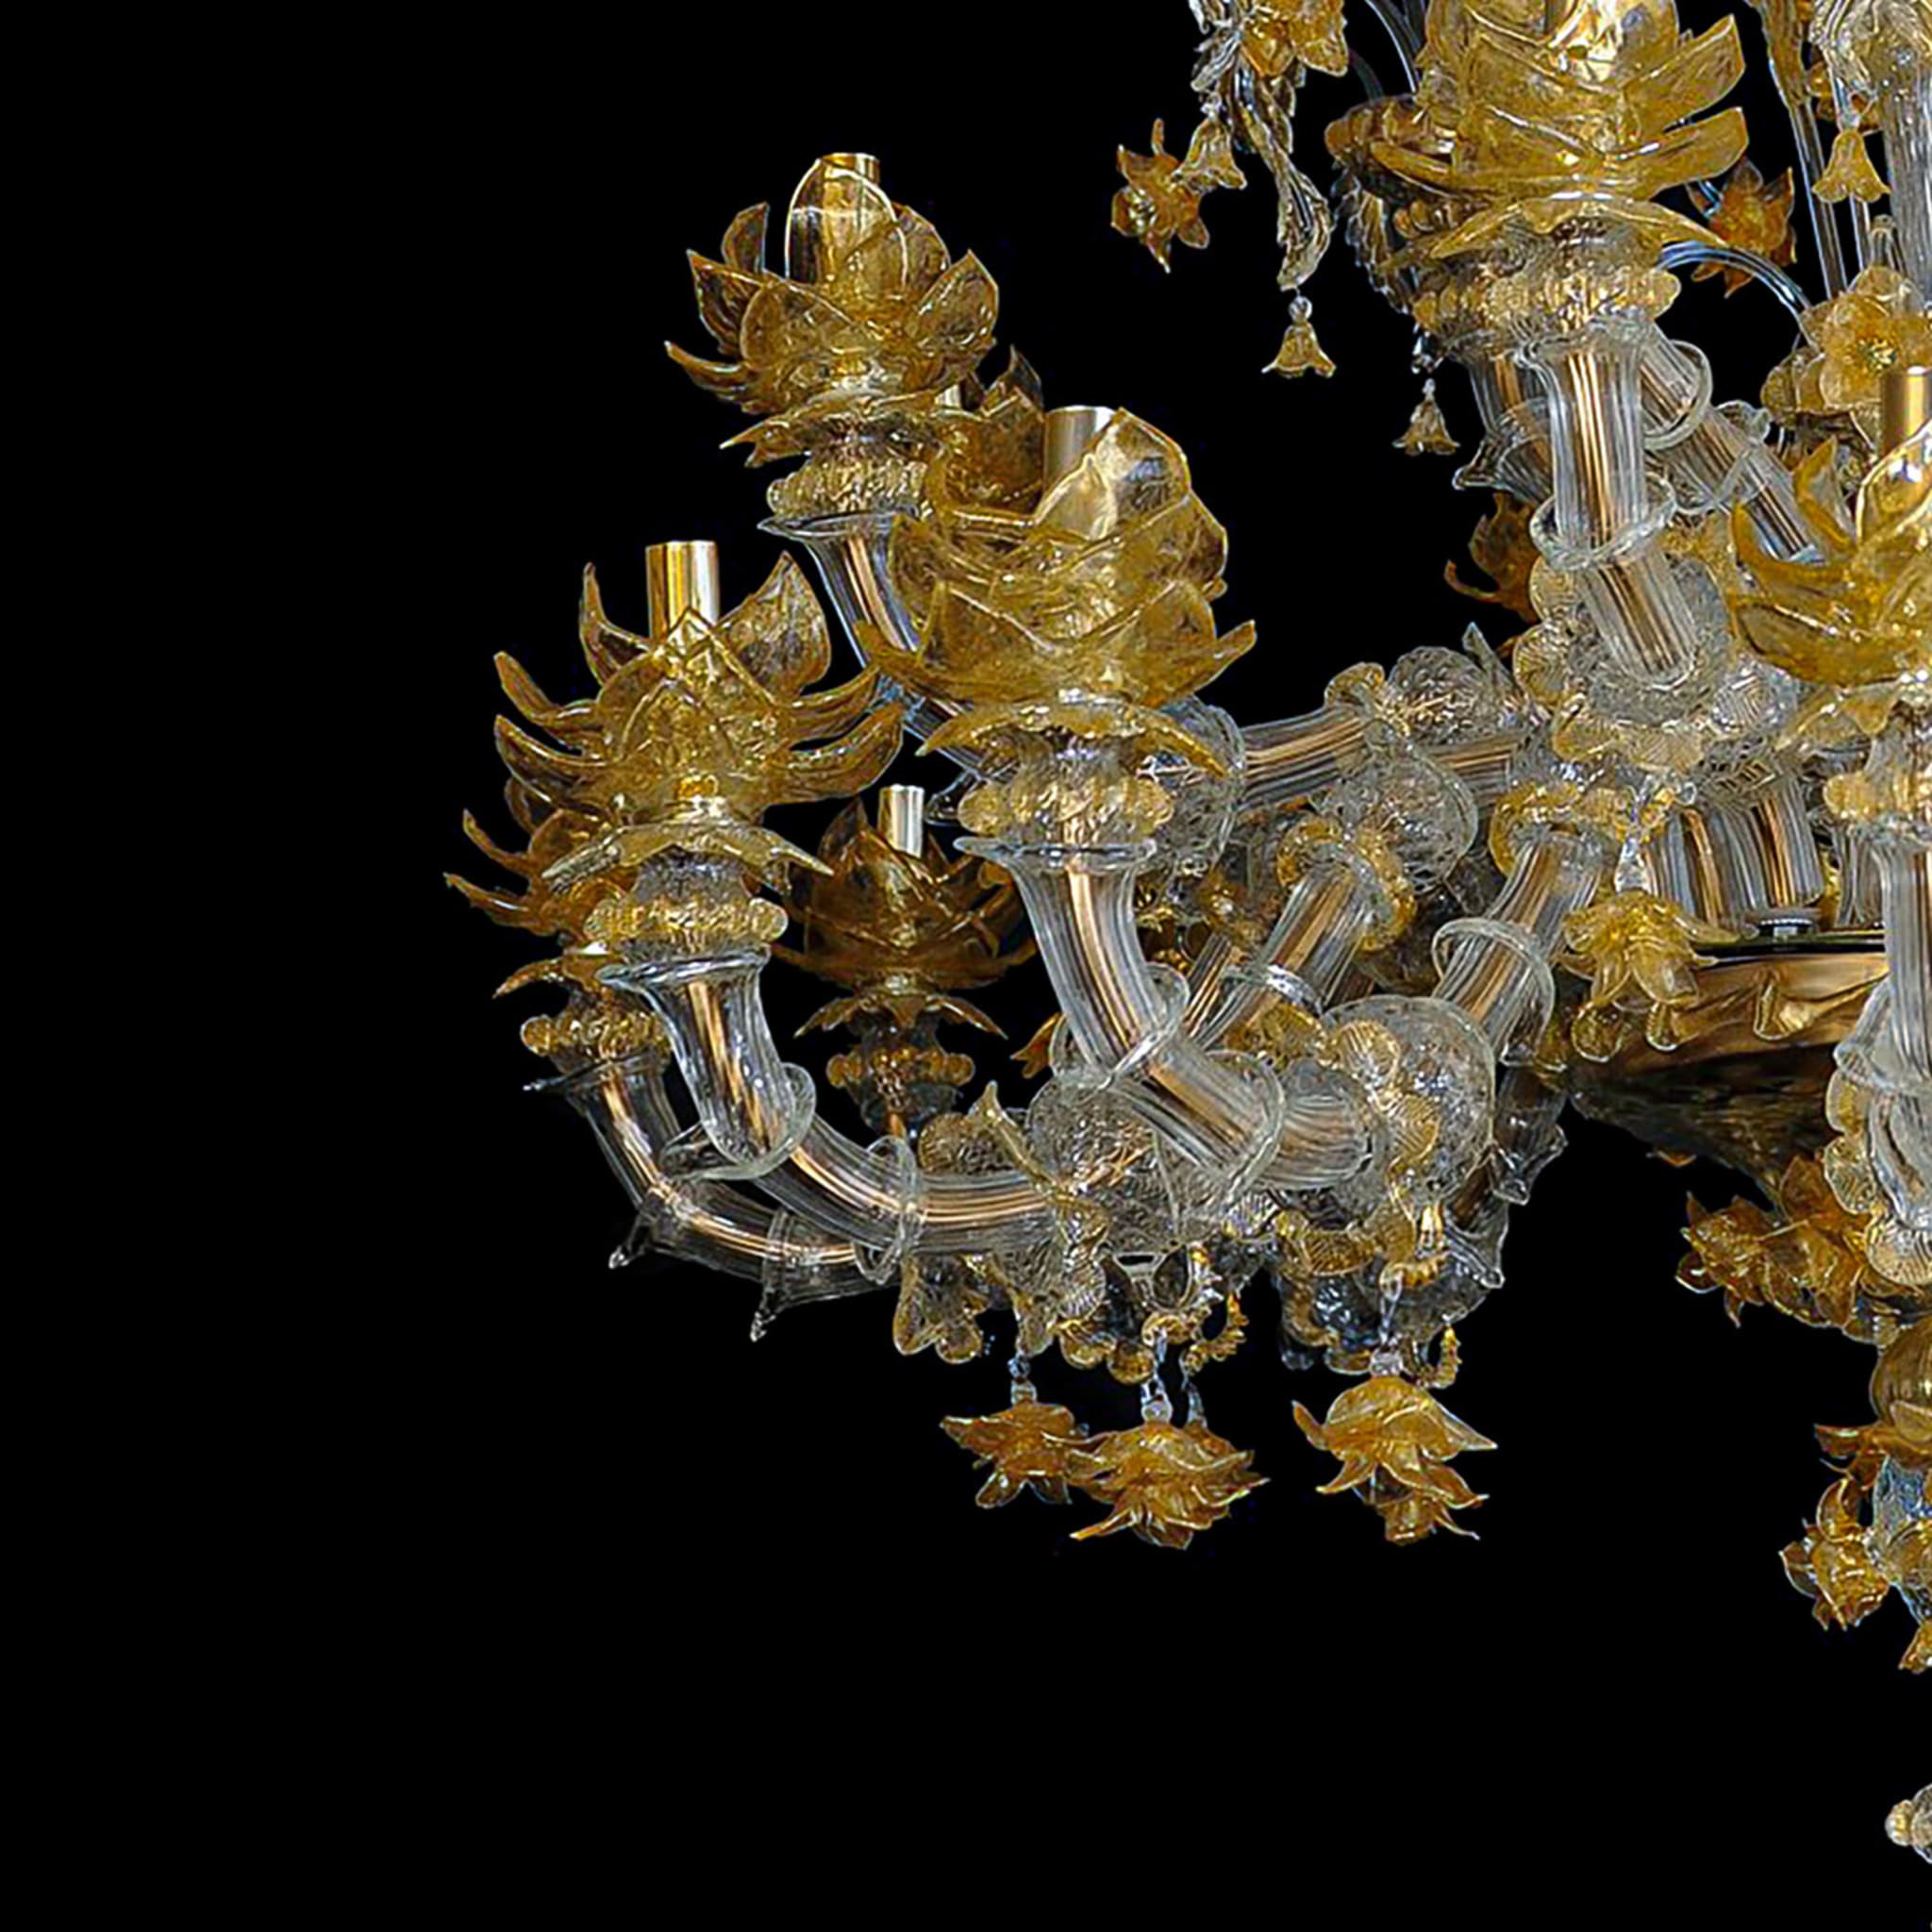 Rezzonico-style Gold and Crystal Chandelier #4 - Alternative view 5